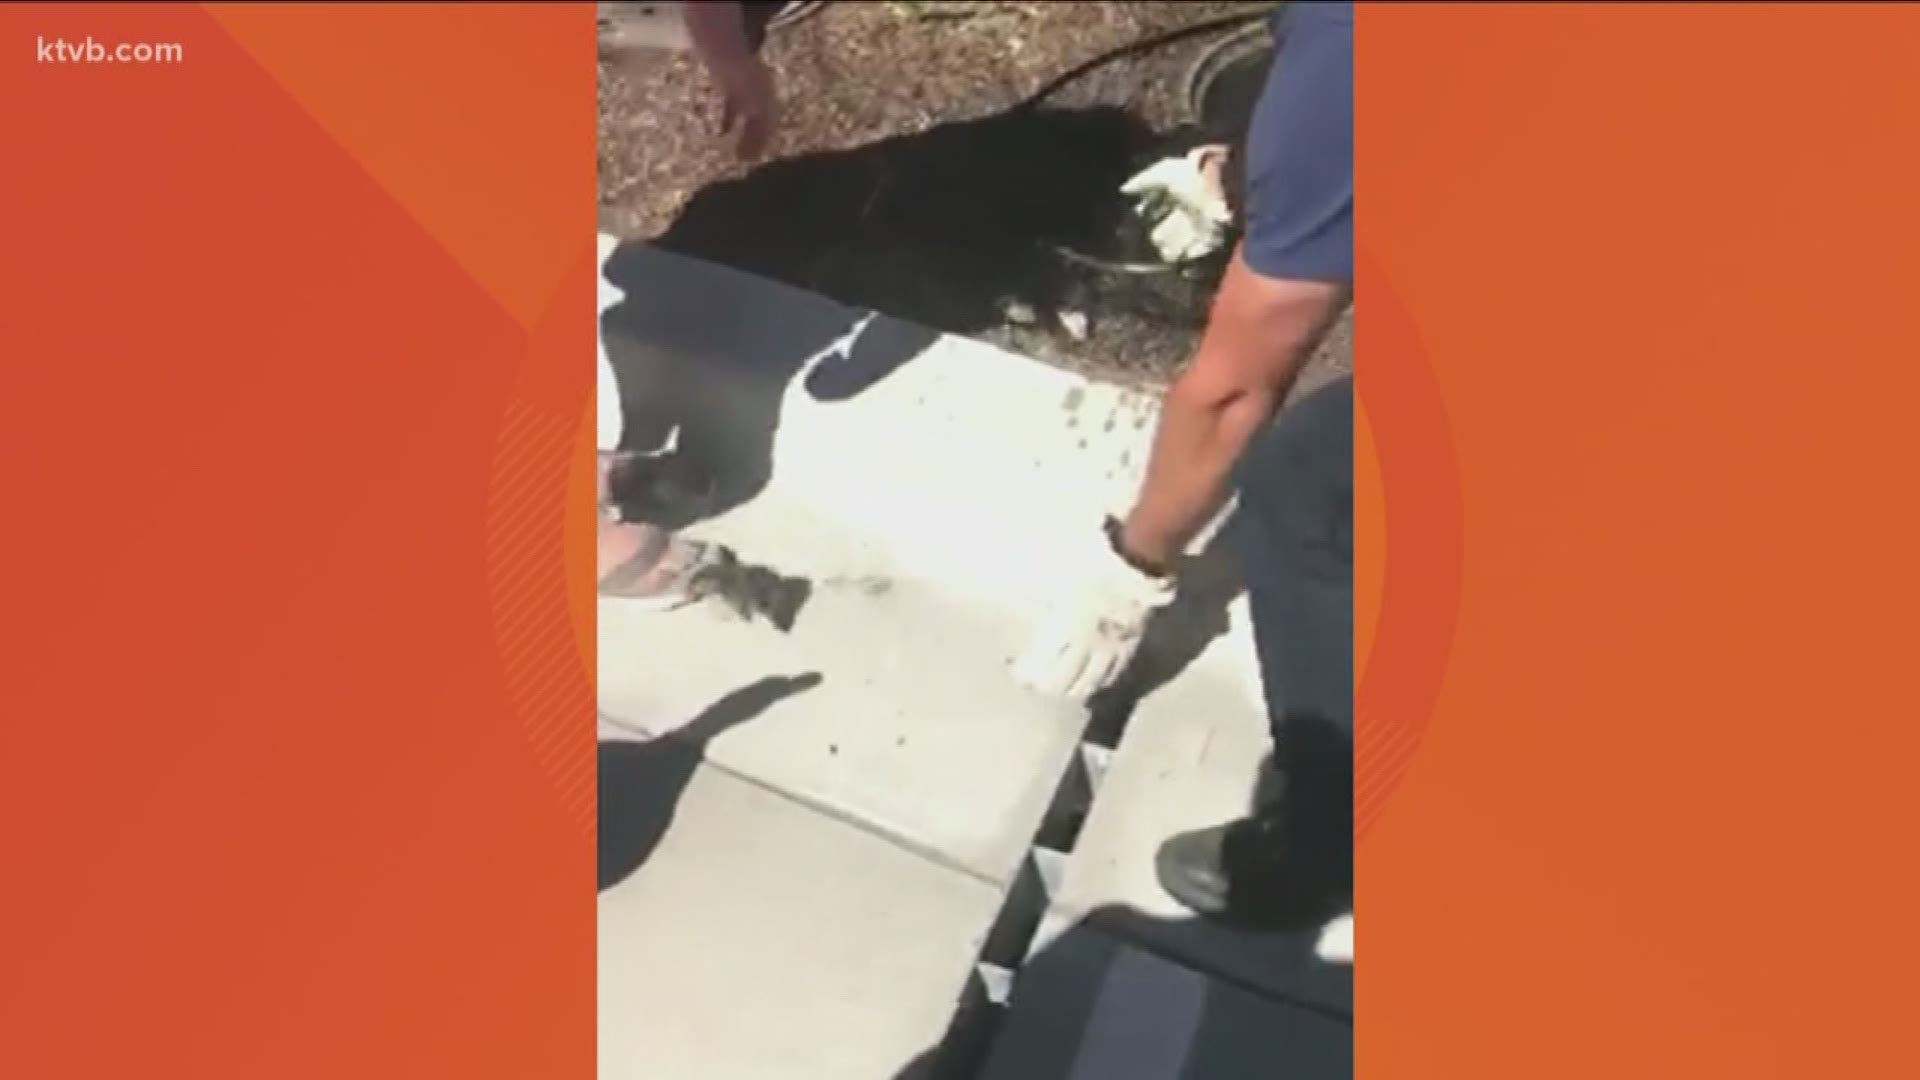 KTVB viewer Michelle Moore shared this video with us of Star firefighters saving some baby ducklings from a storm drain.